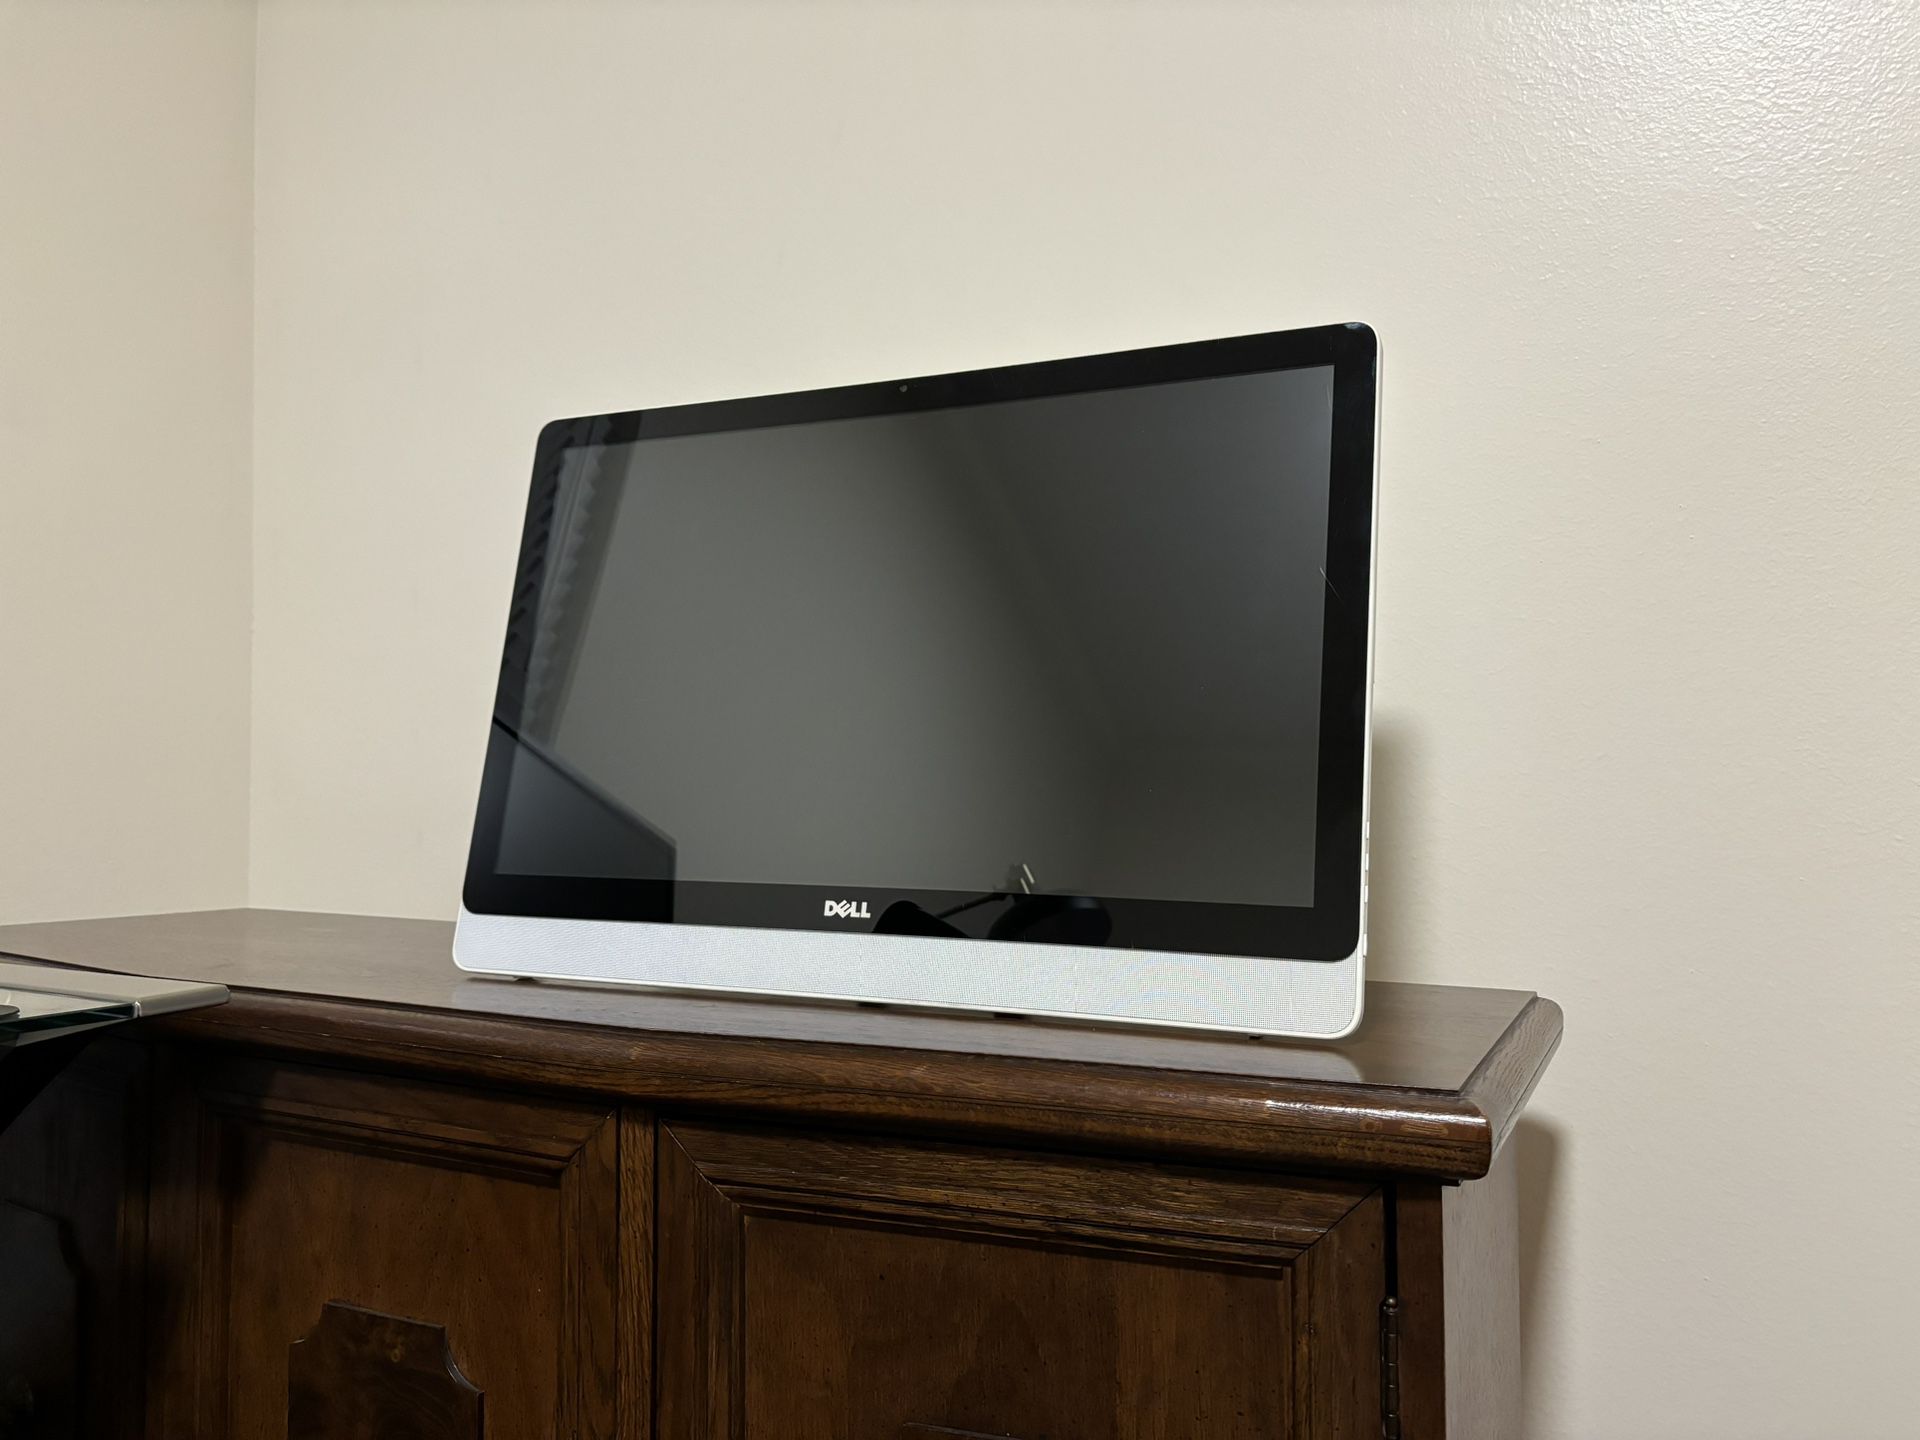 DELL Inspiron 24, Model 3455 All-In-One touchscreen desktop computer